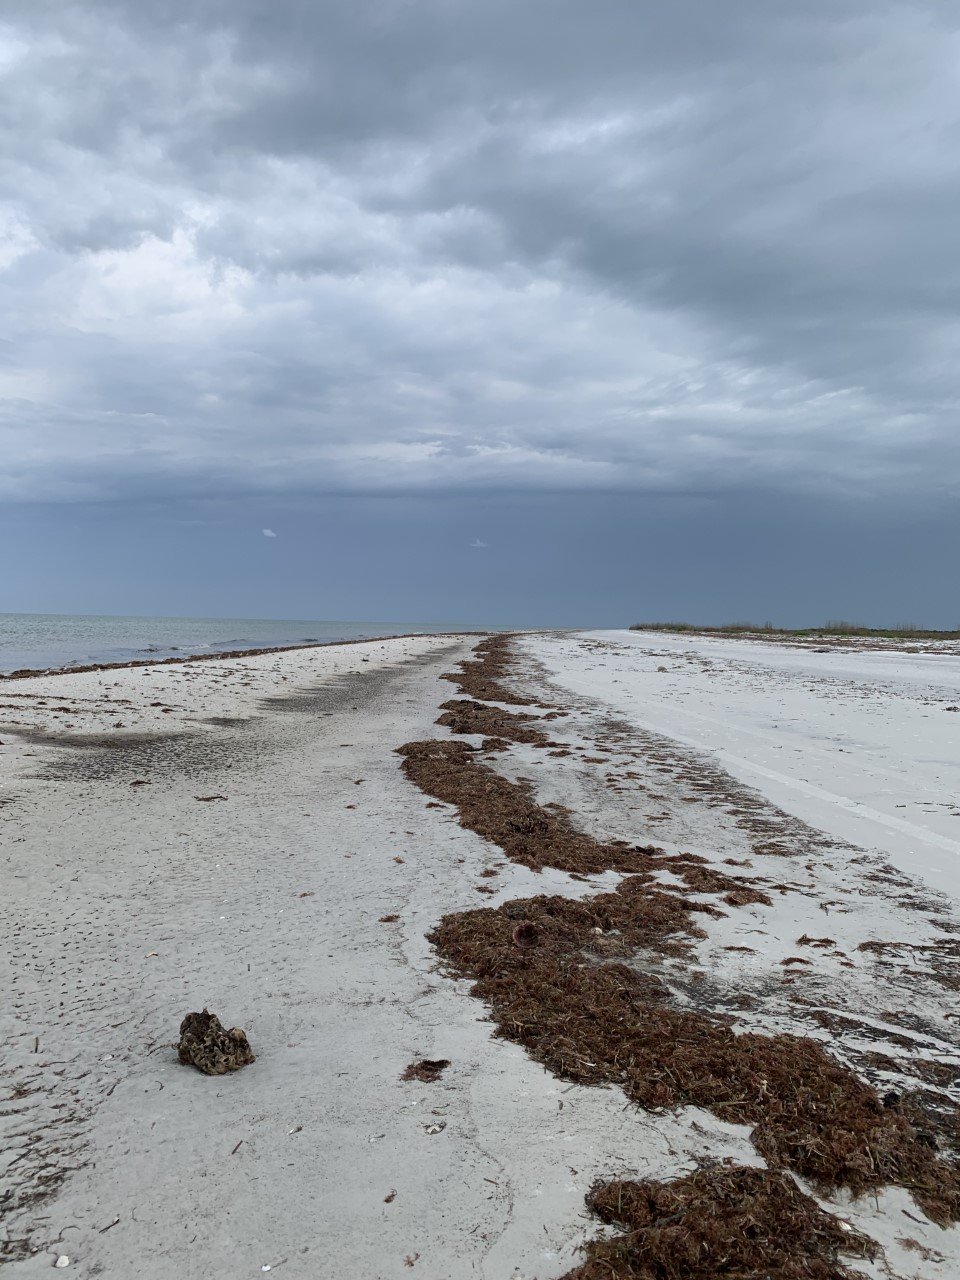 Southern end of Anclote Key Island